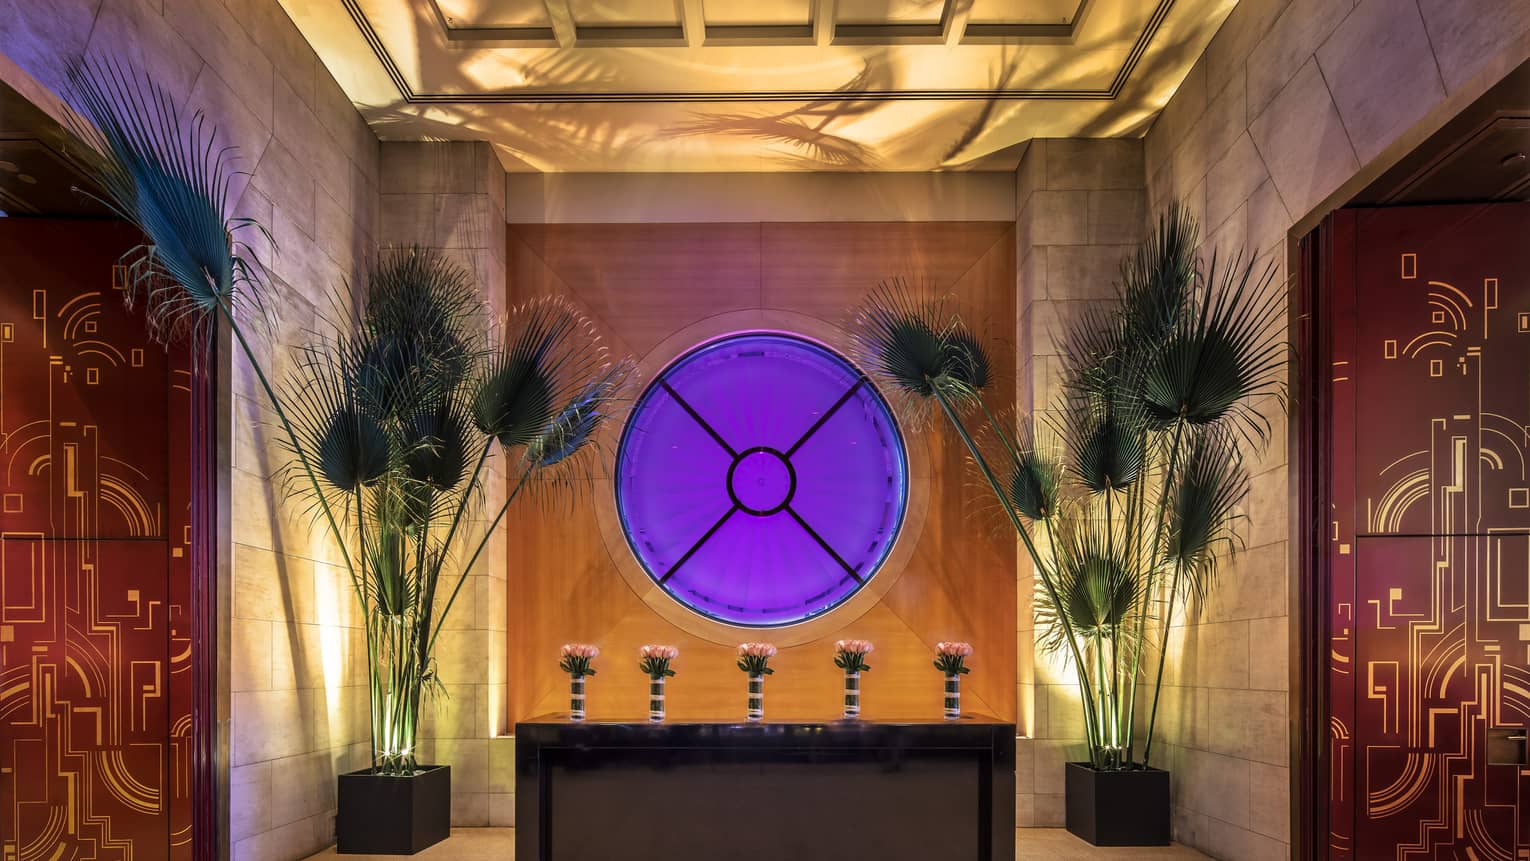 An ornate entryway to FIFTY with a circular window glowing purple, two tall green floral installations and red and gold abstract wall paper